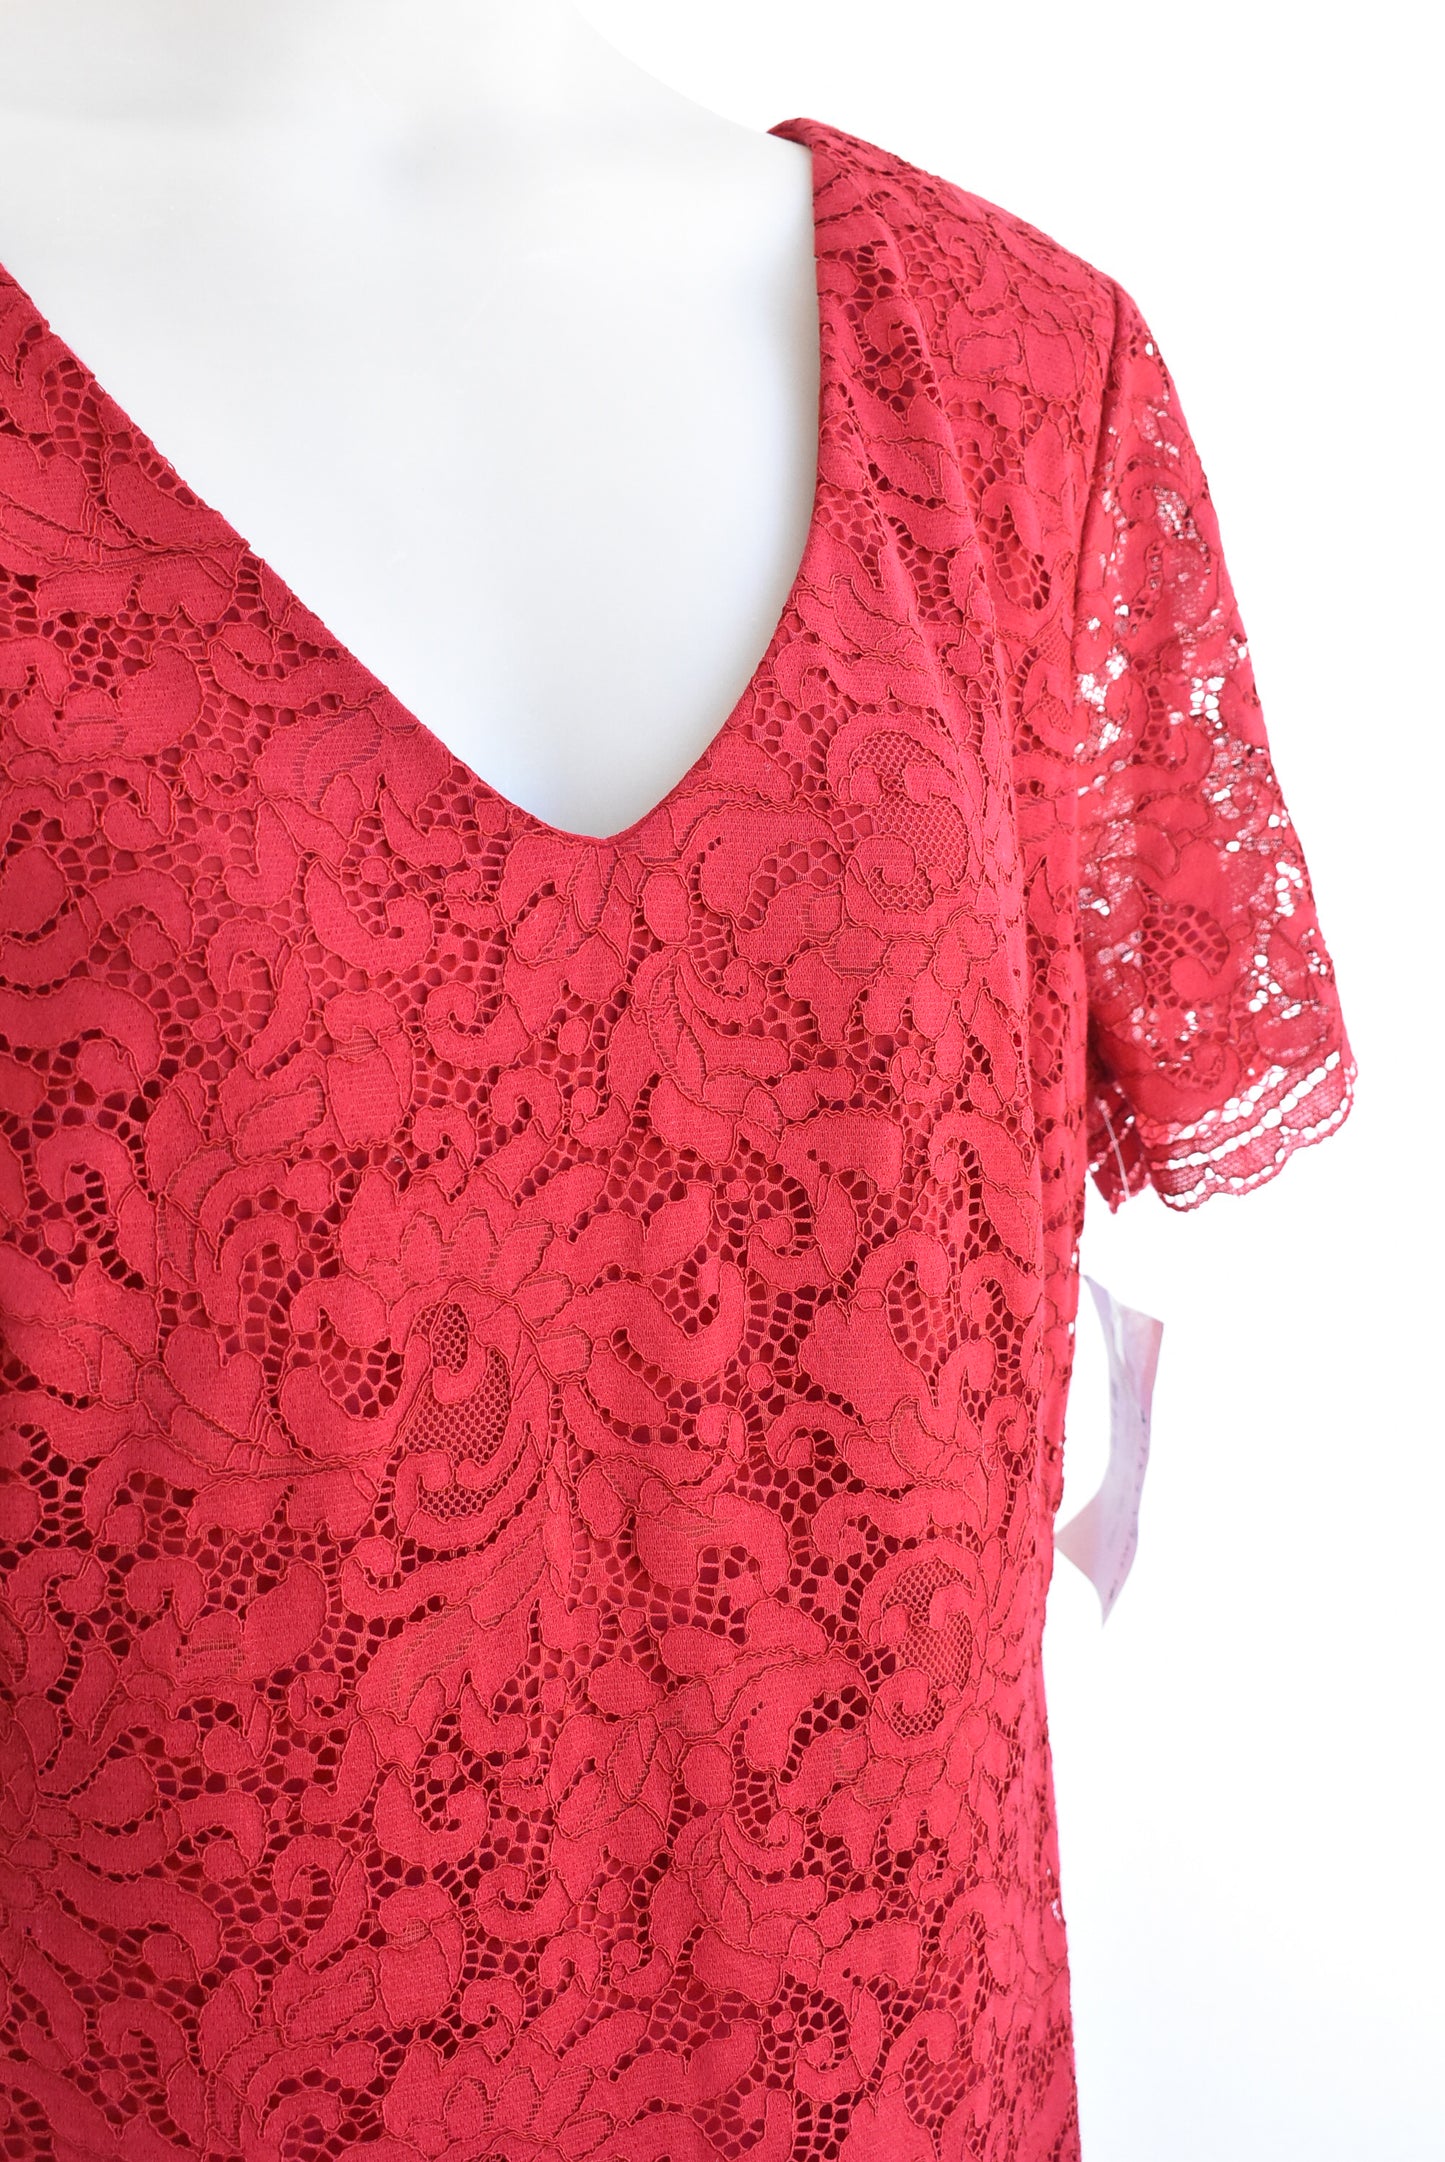 Ralph Lauren ruby red lacy dress NEW, size L